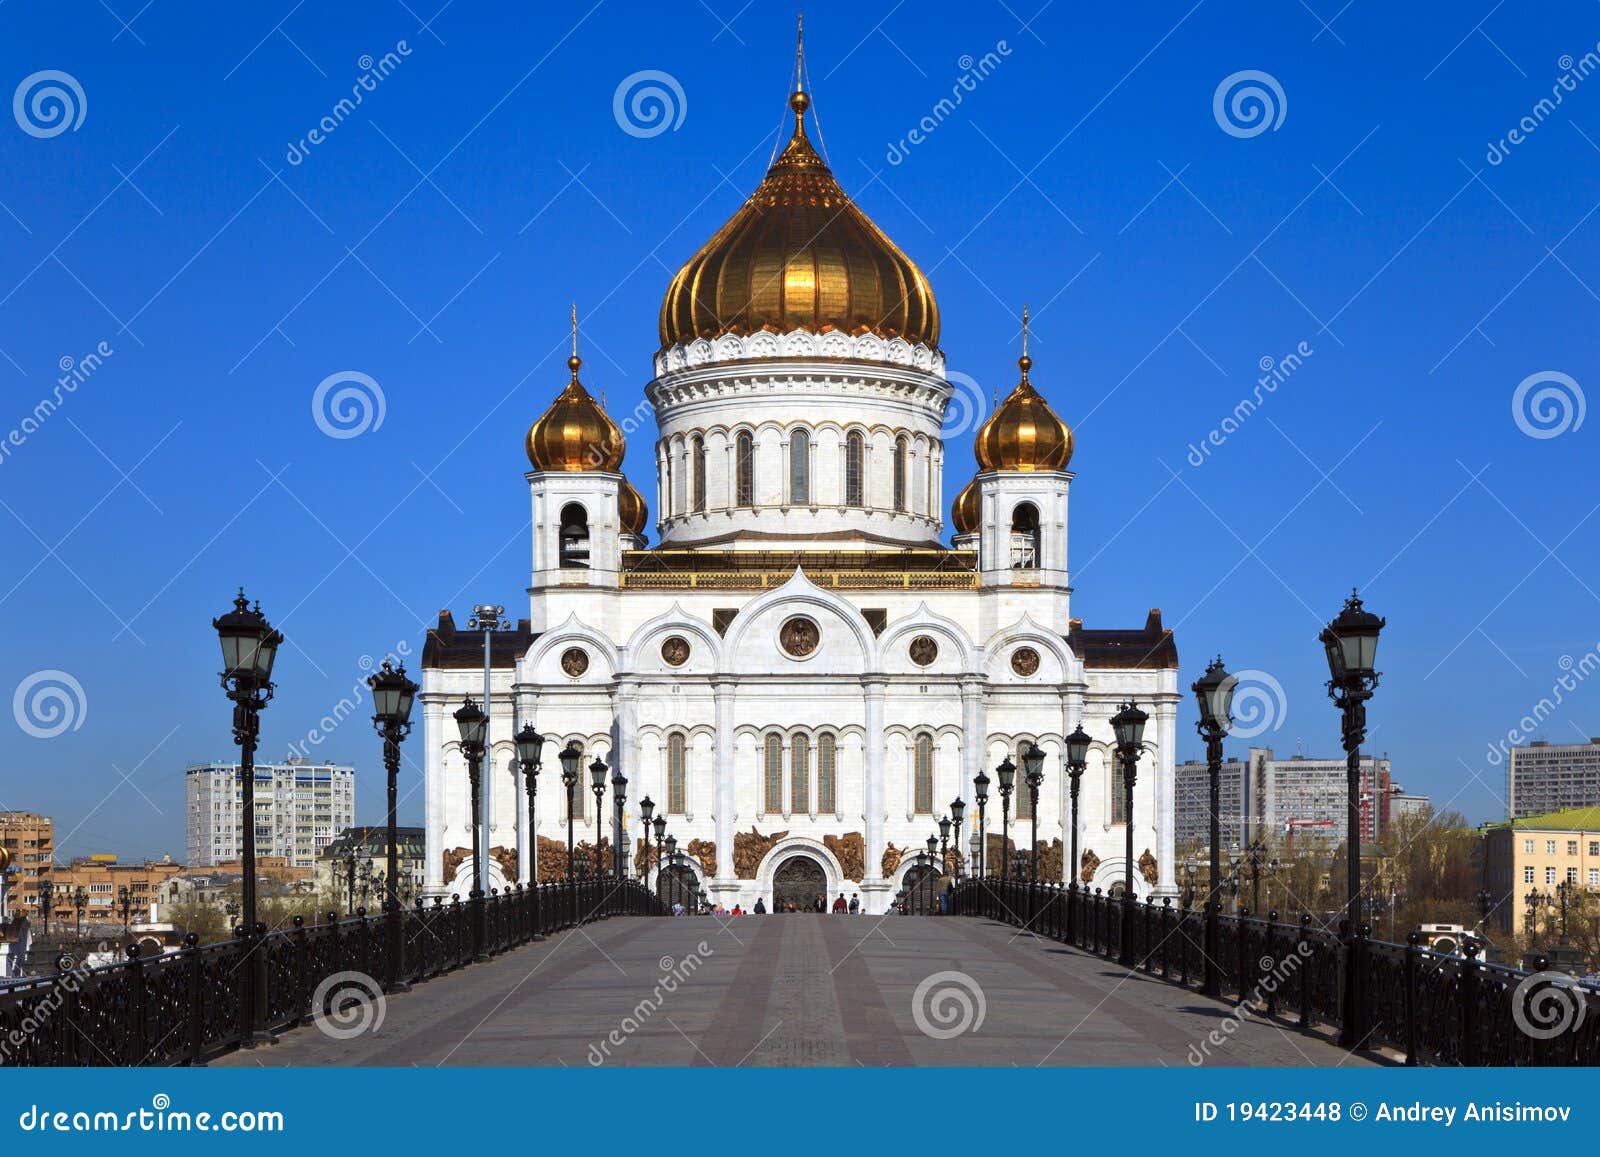 the cathedral of christ the savior, moscow